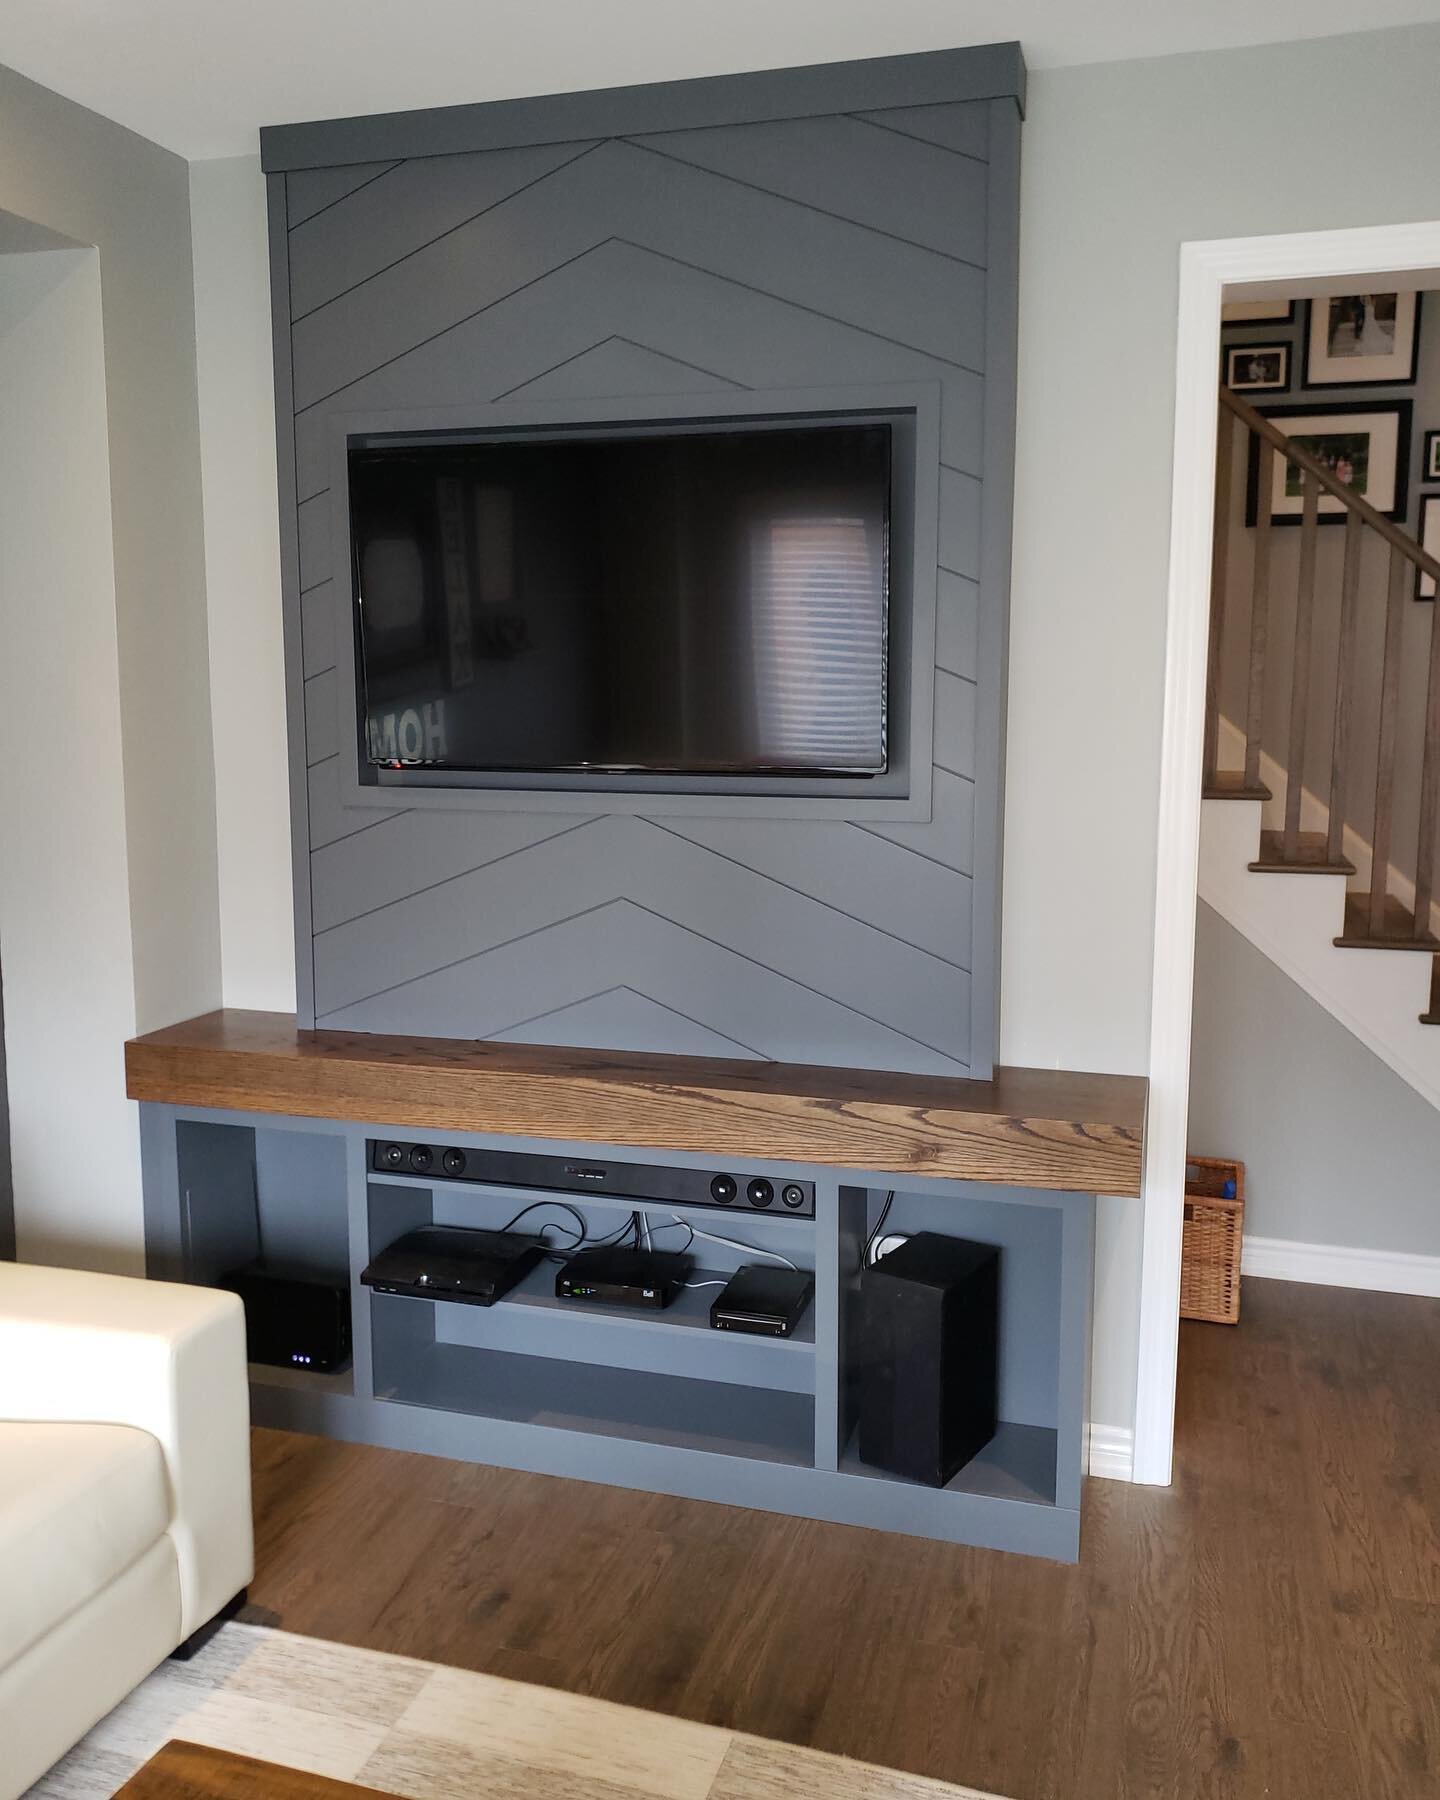 Remember that sneak peak from our story last week? Here&rsquo;s the final product! 😍 #custom shelving and tv cut out to fit our customers pre-existing electronics, complete with an oak mantel. We really love this one!!
.
.
Email us with your ideas t